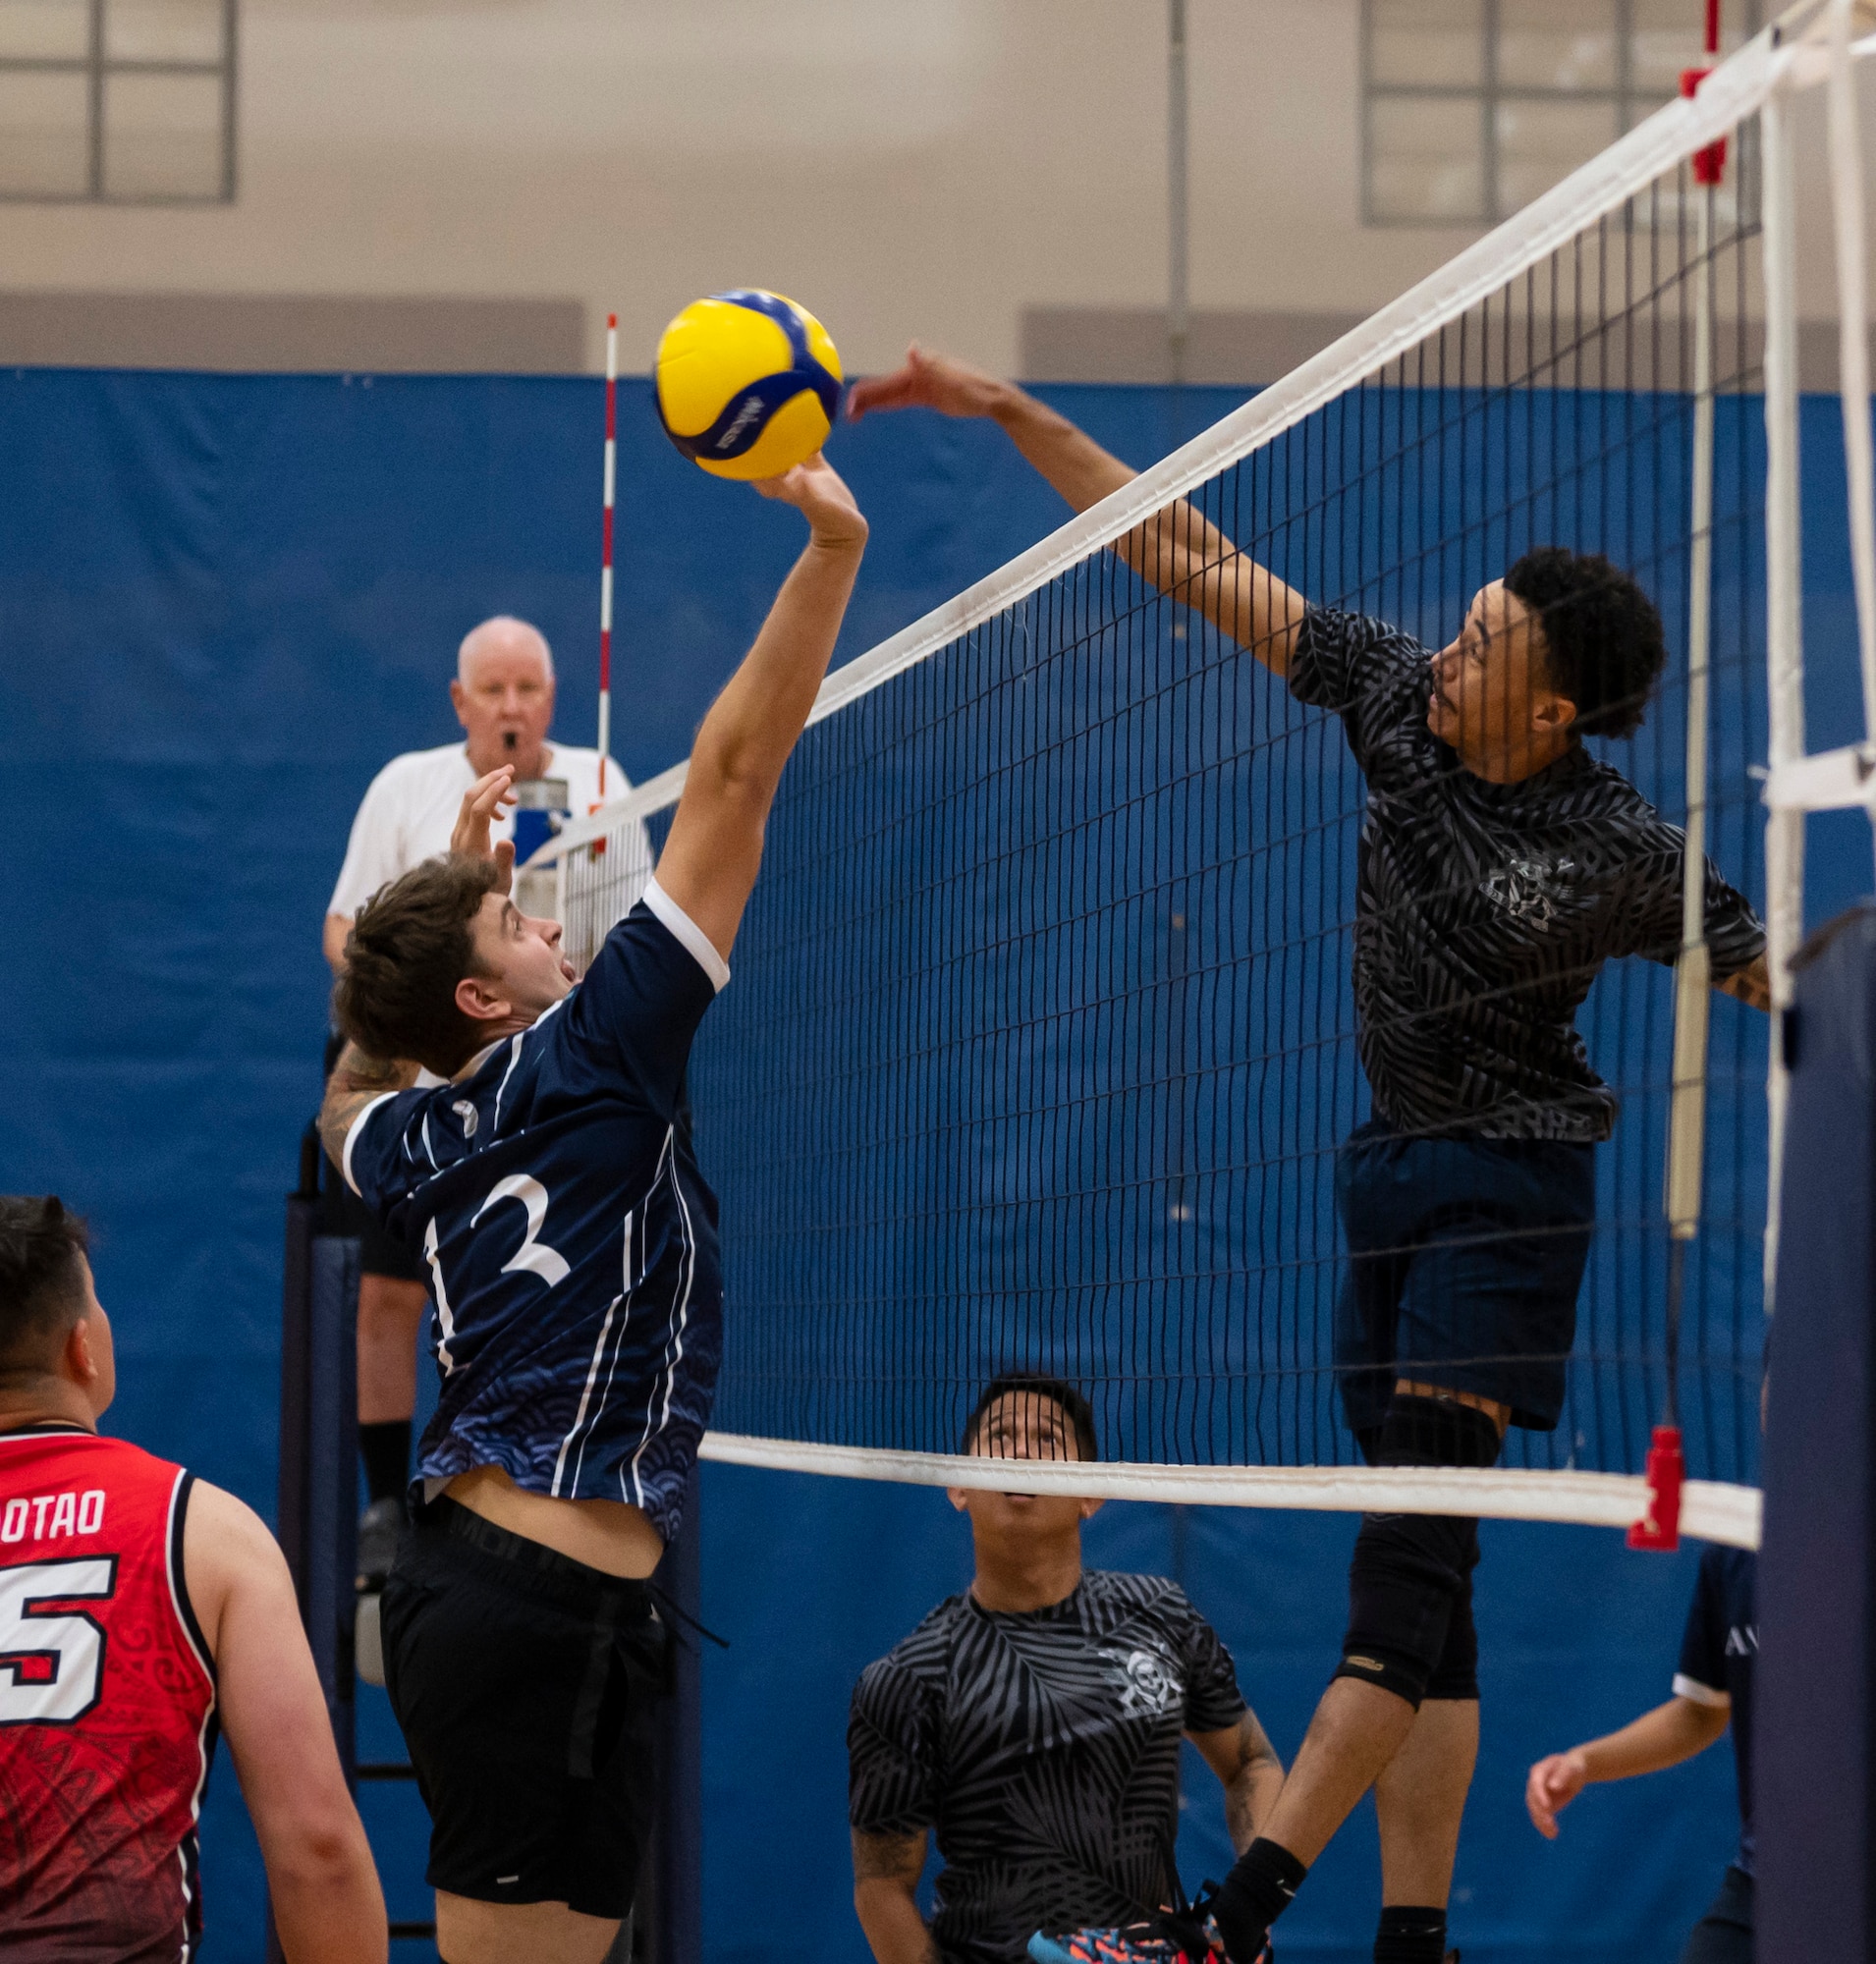 U.S. Air Force Senior Airman Jeremiah Watts, a member of the Security Forces Squadron’s intramural volleyball team hits the ball while U.S. Air Force Senior Airman Archie Conn, a member of the Civil Engineer Squadron’s intermural volleyball team, defends it during the championship game on Andersen Air Force Base, Guam, Oct. 26, 2023.  Andersen’s intramural volleyball league ended in a climactic final game between the Security Forces Squadron and CES. The game ended with SFS being named the champions. (U.S. Air Force photo by Airman 1st Class Spencer Perkins)